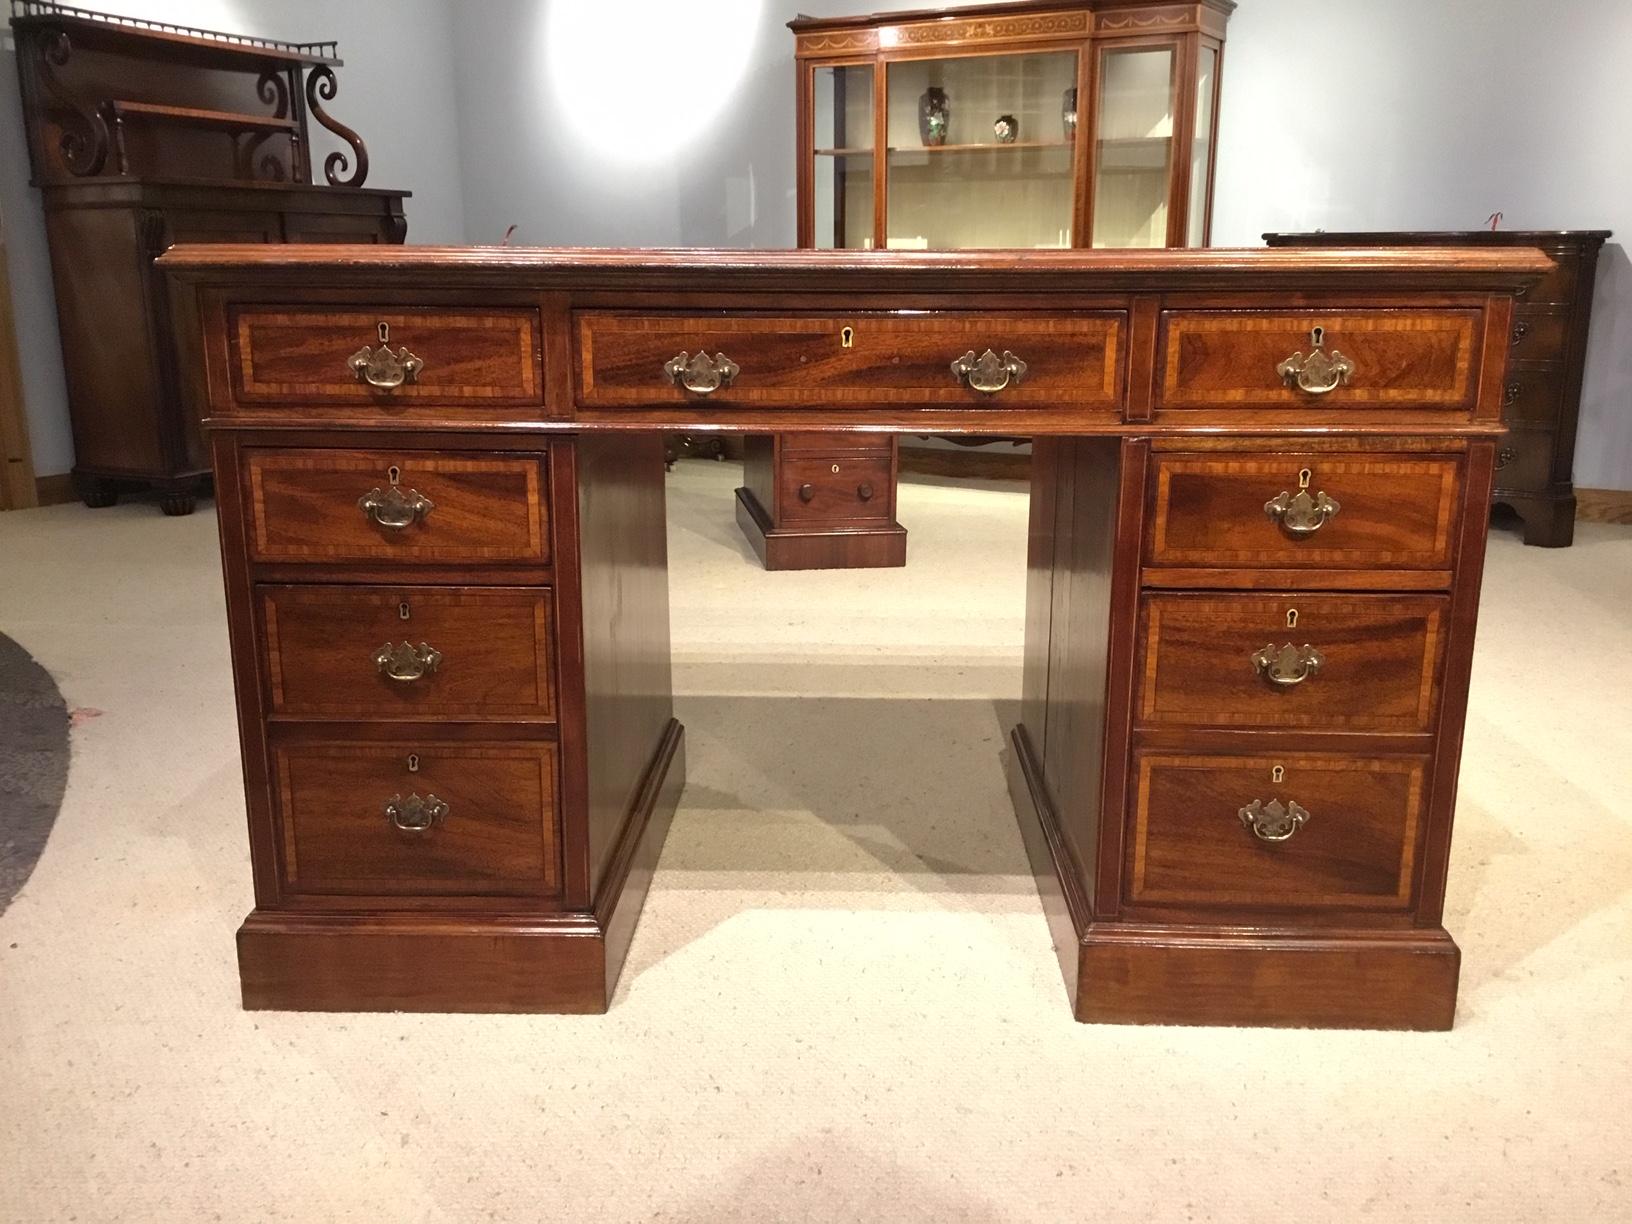 A mahogany and satinwood banded Edwardian period antique pedestal desk. Having a rectangular solid mahogany top cross banded in satinwood and with an inset green leather writing surface with gilt tooled detail. With an arrangement of nine